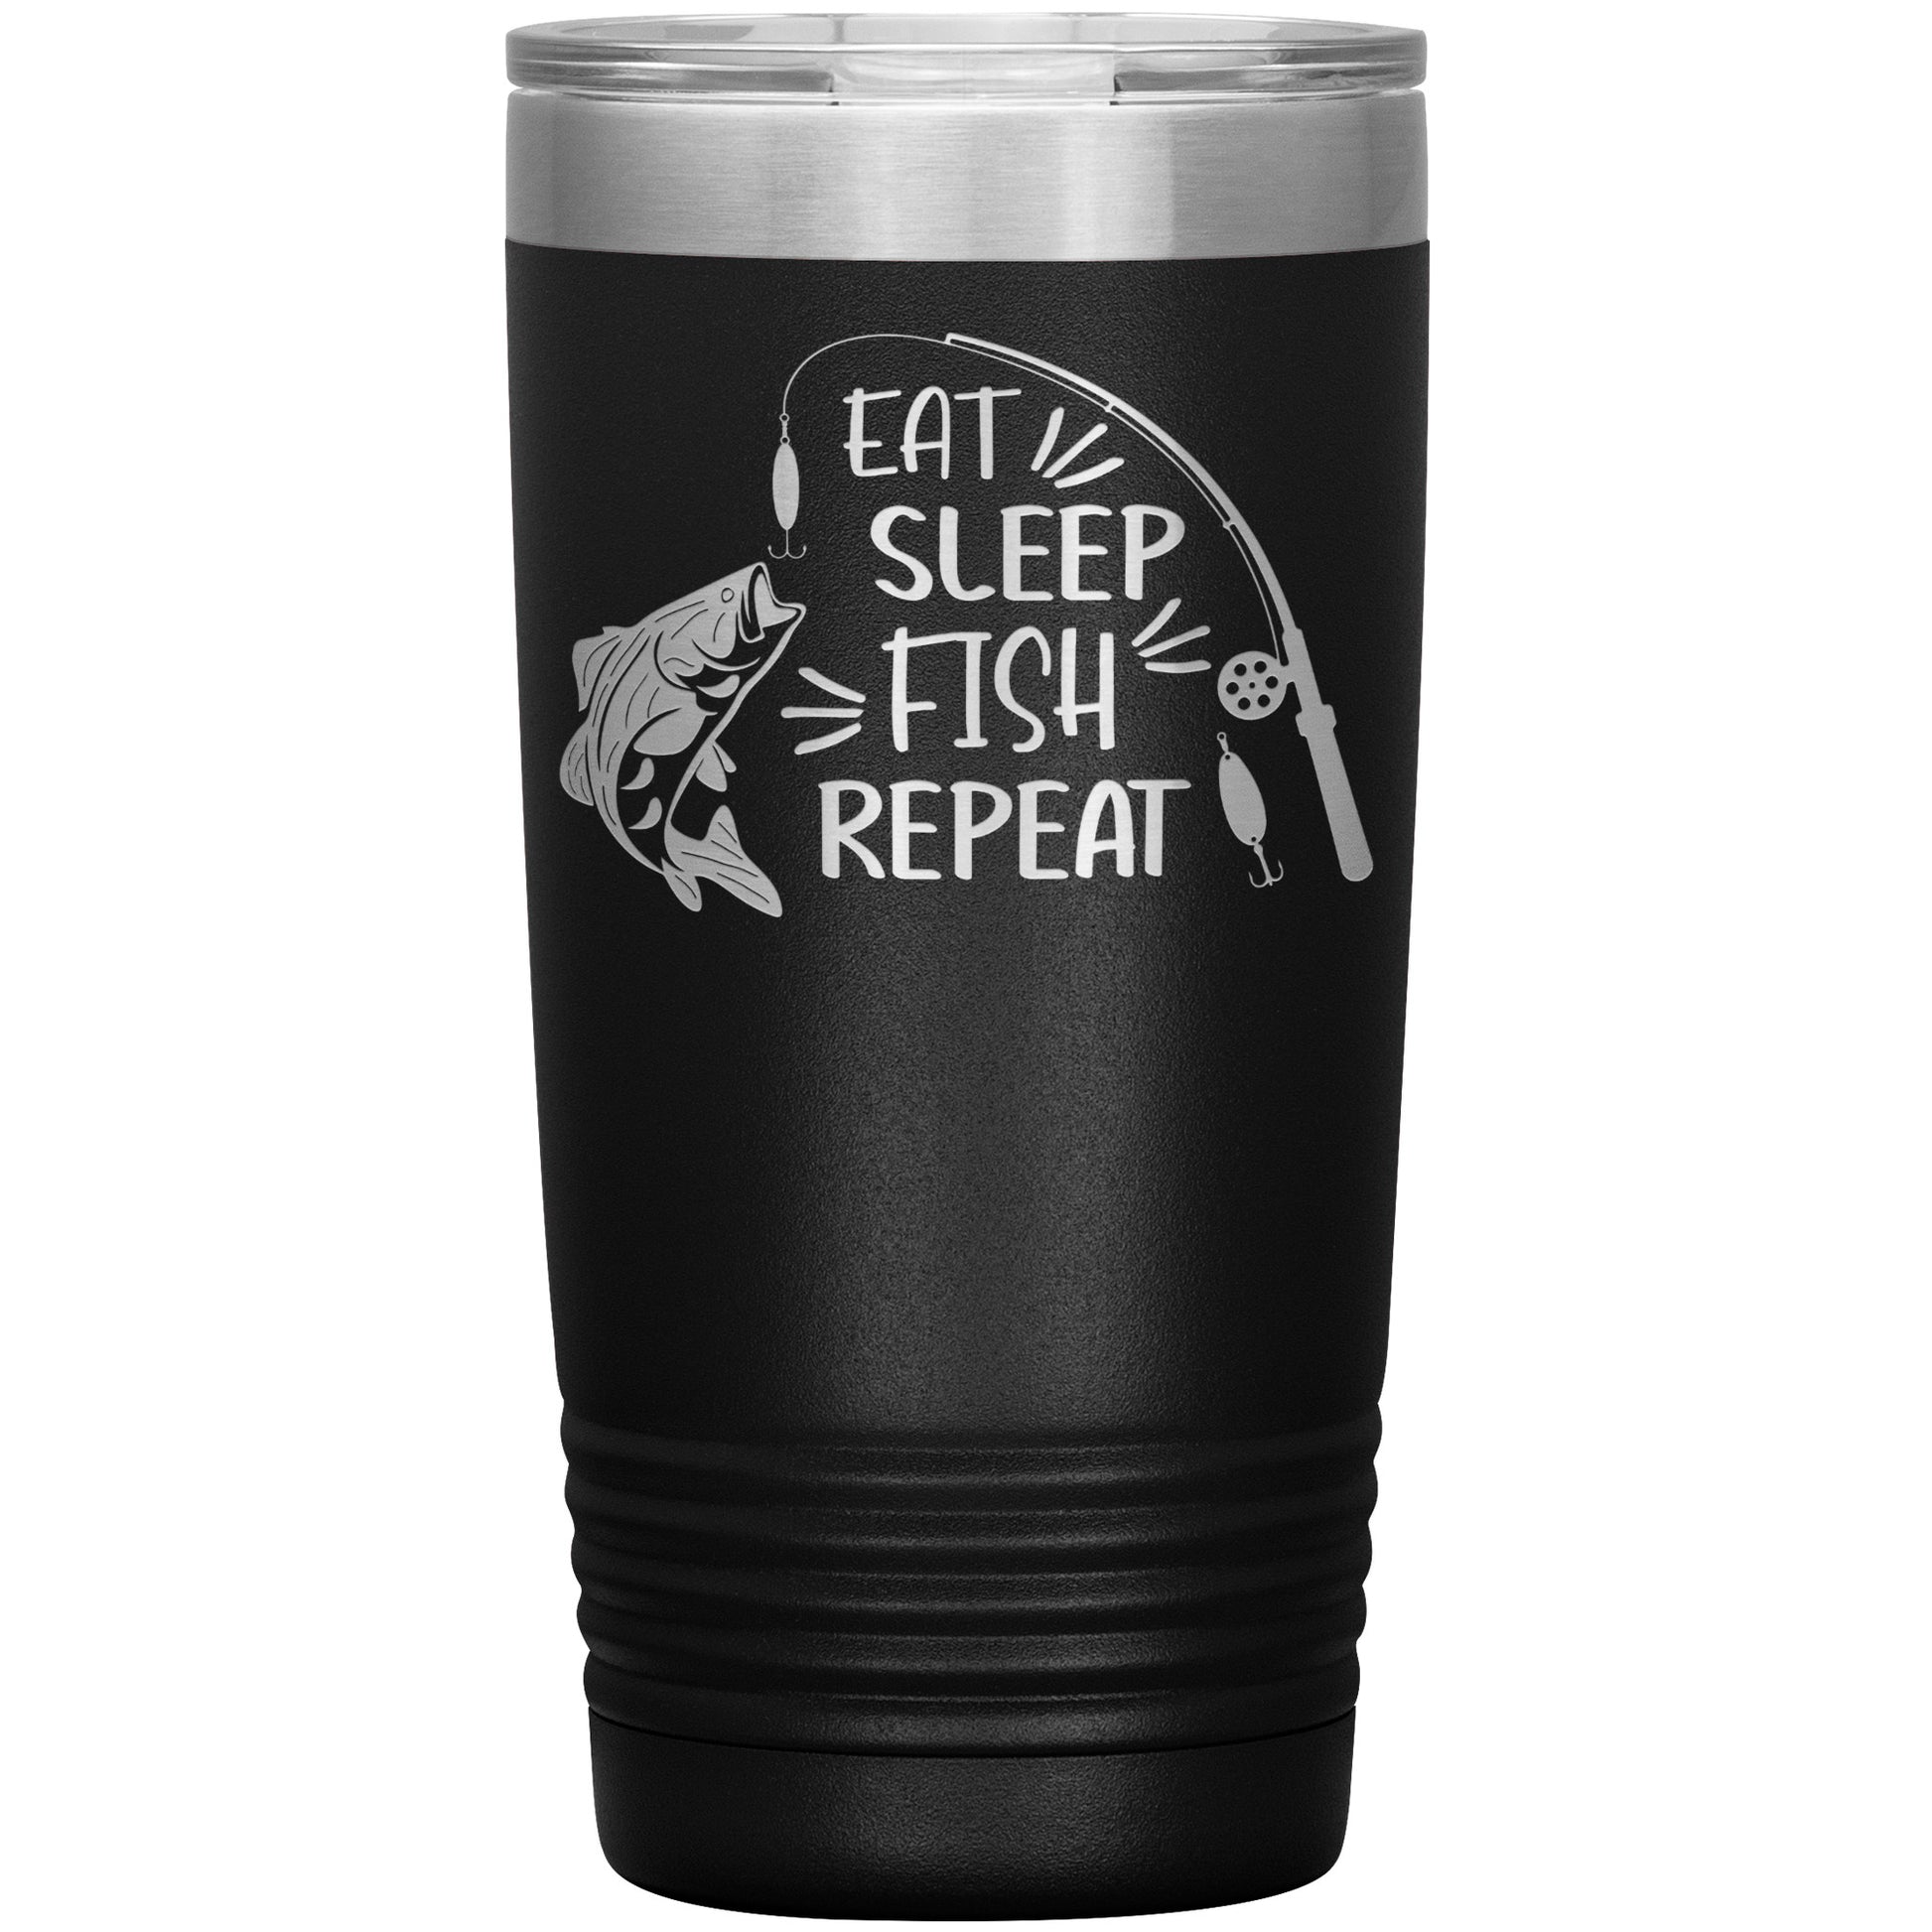 A blue double-wall stainless steel tumbler featuring the white text "eat sleep fish repeat" encircling icons of a fish, a fishing rod, and a lure.